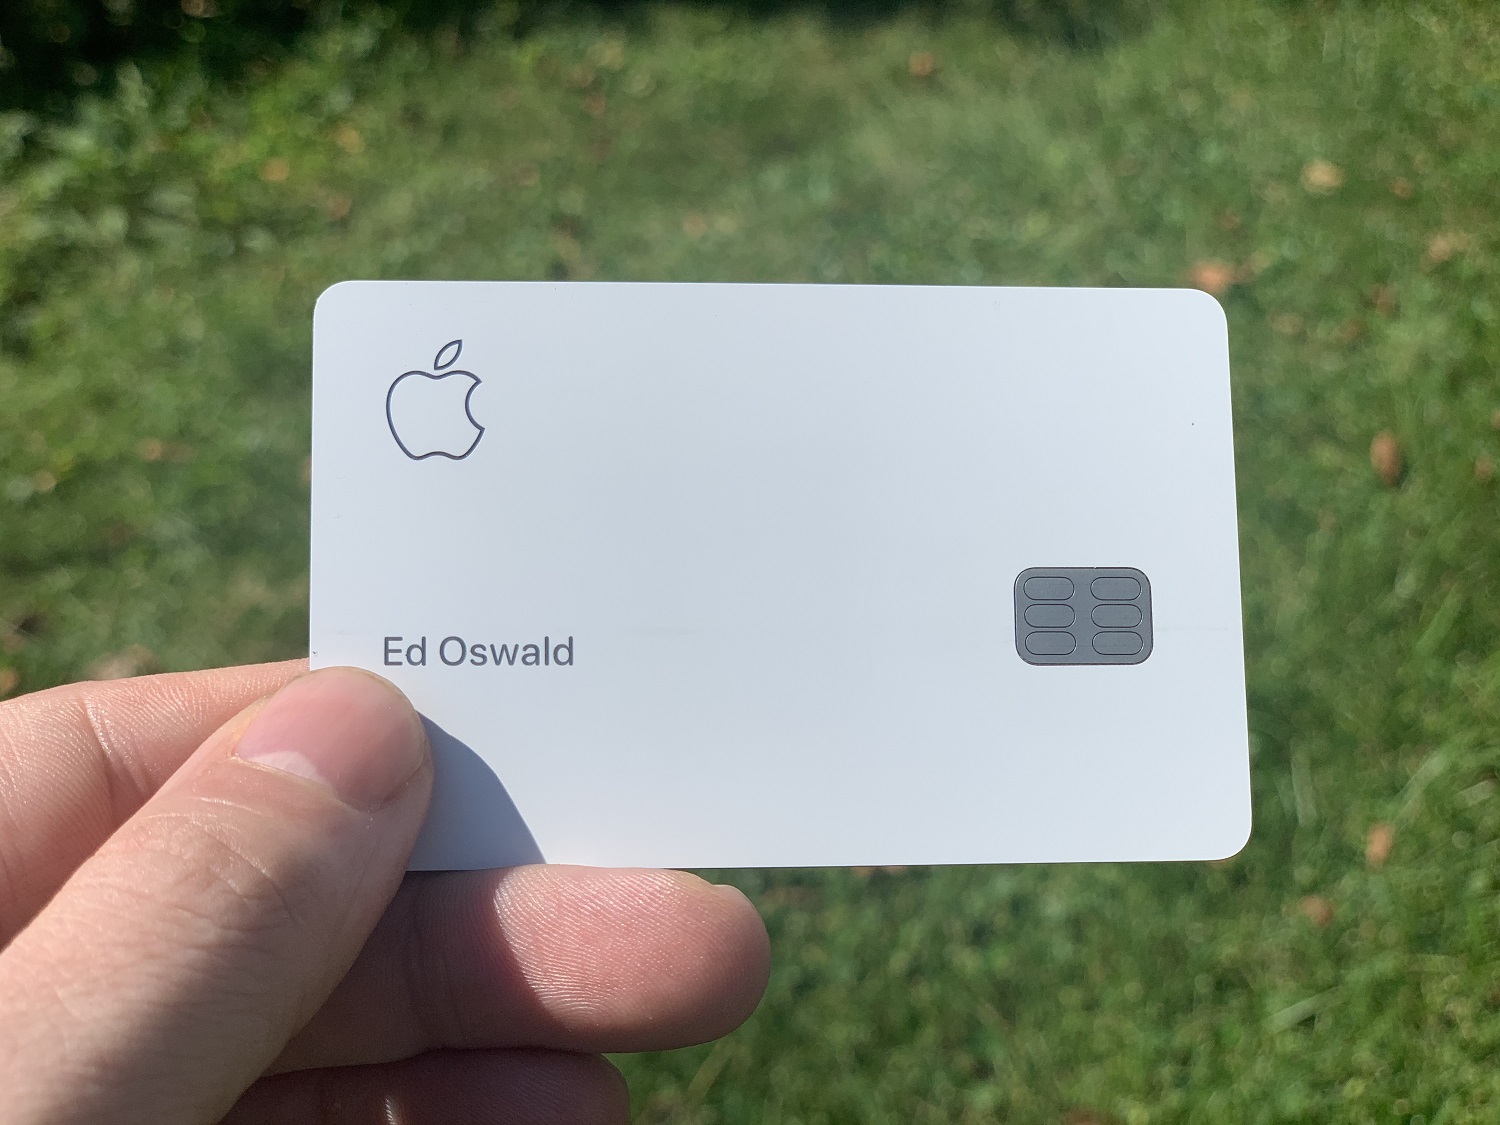 How to Apply for the Apple Credit Card 